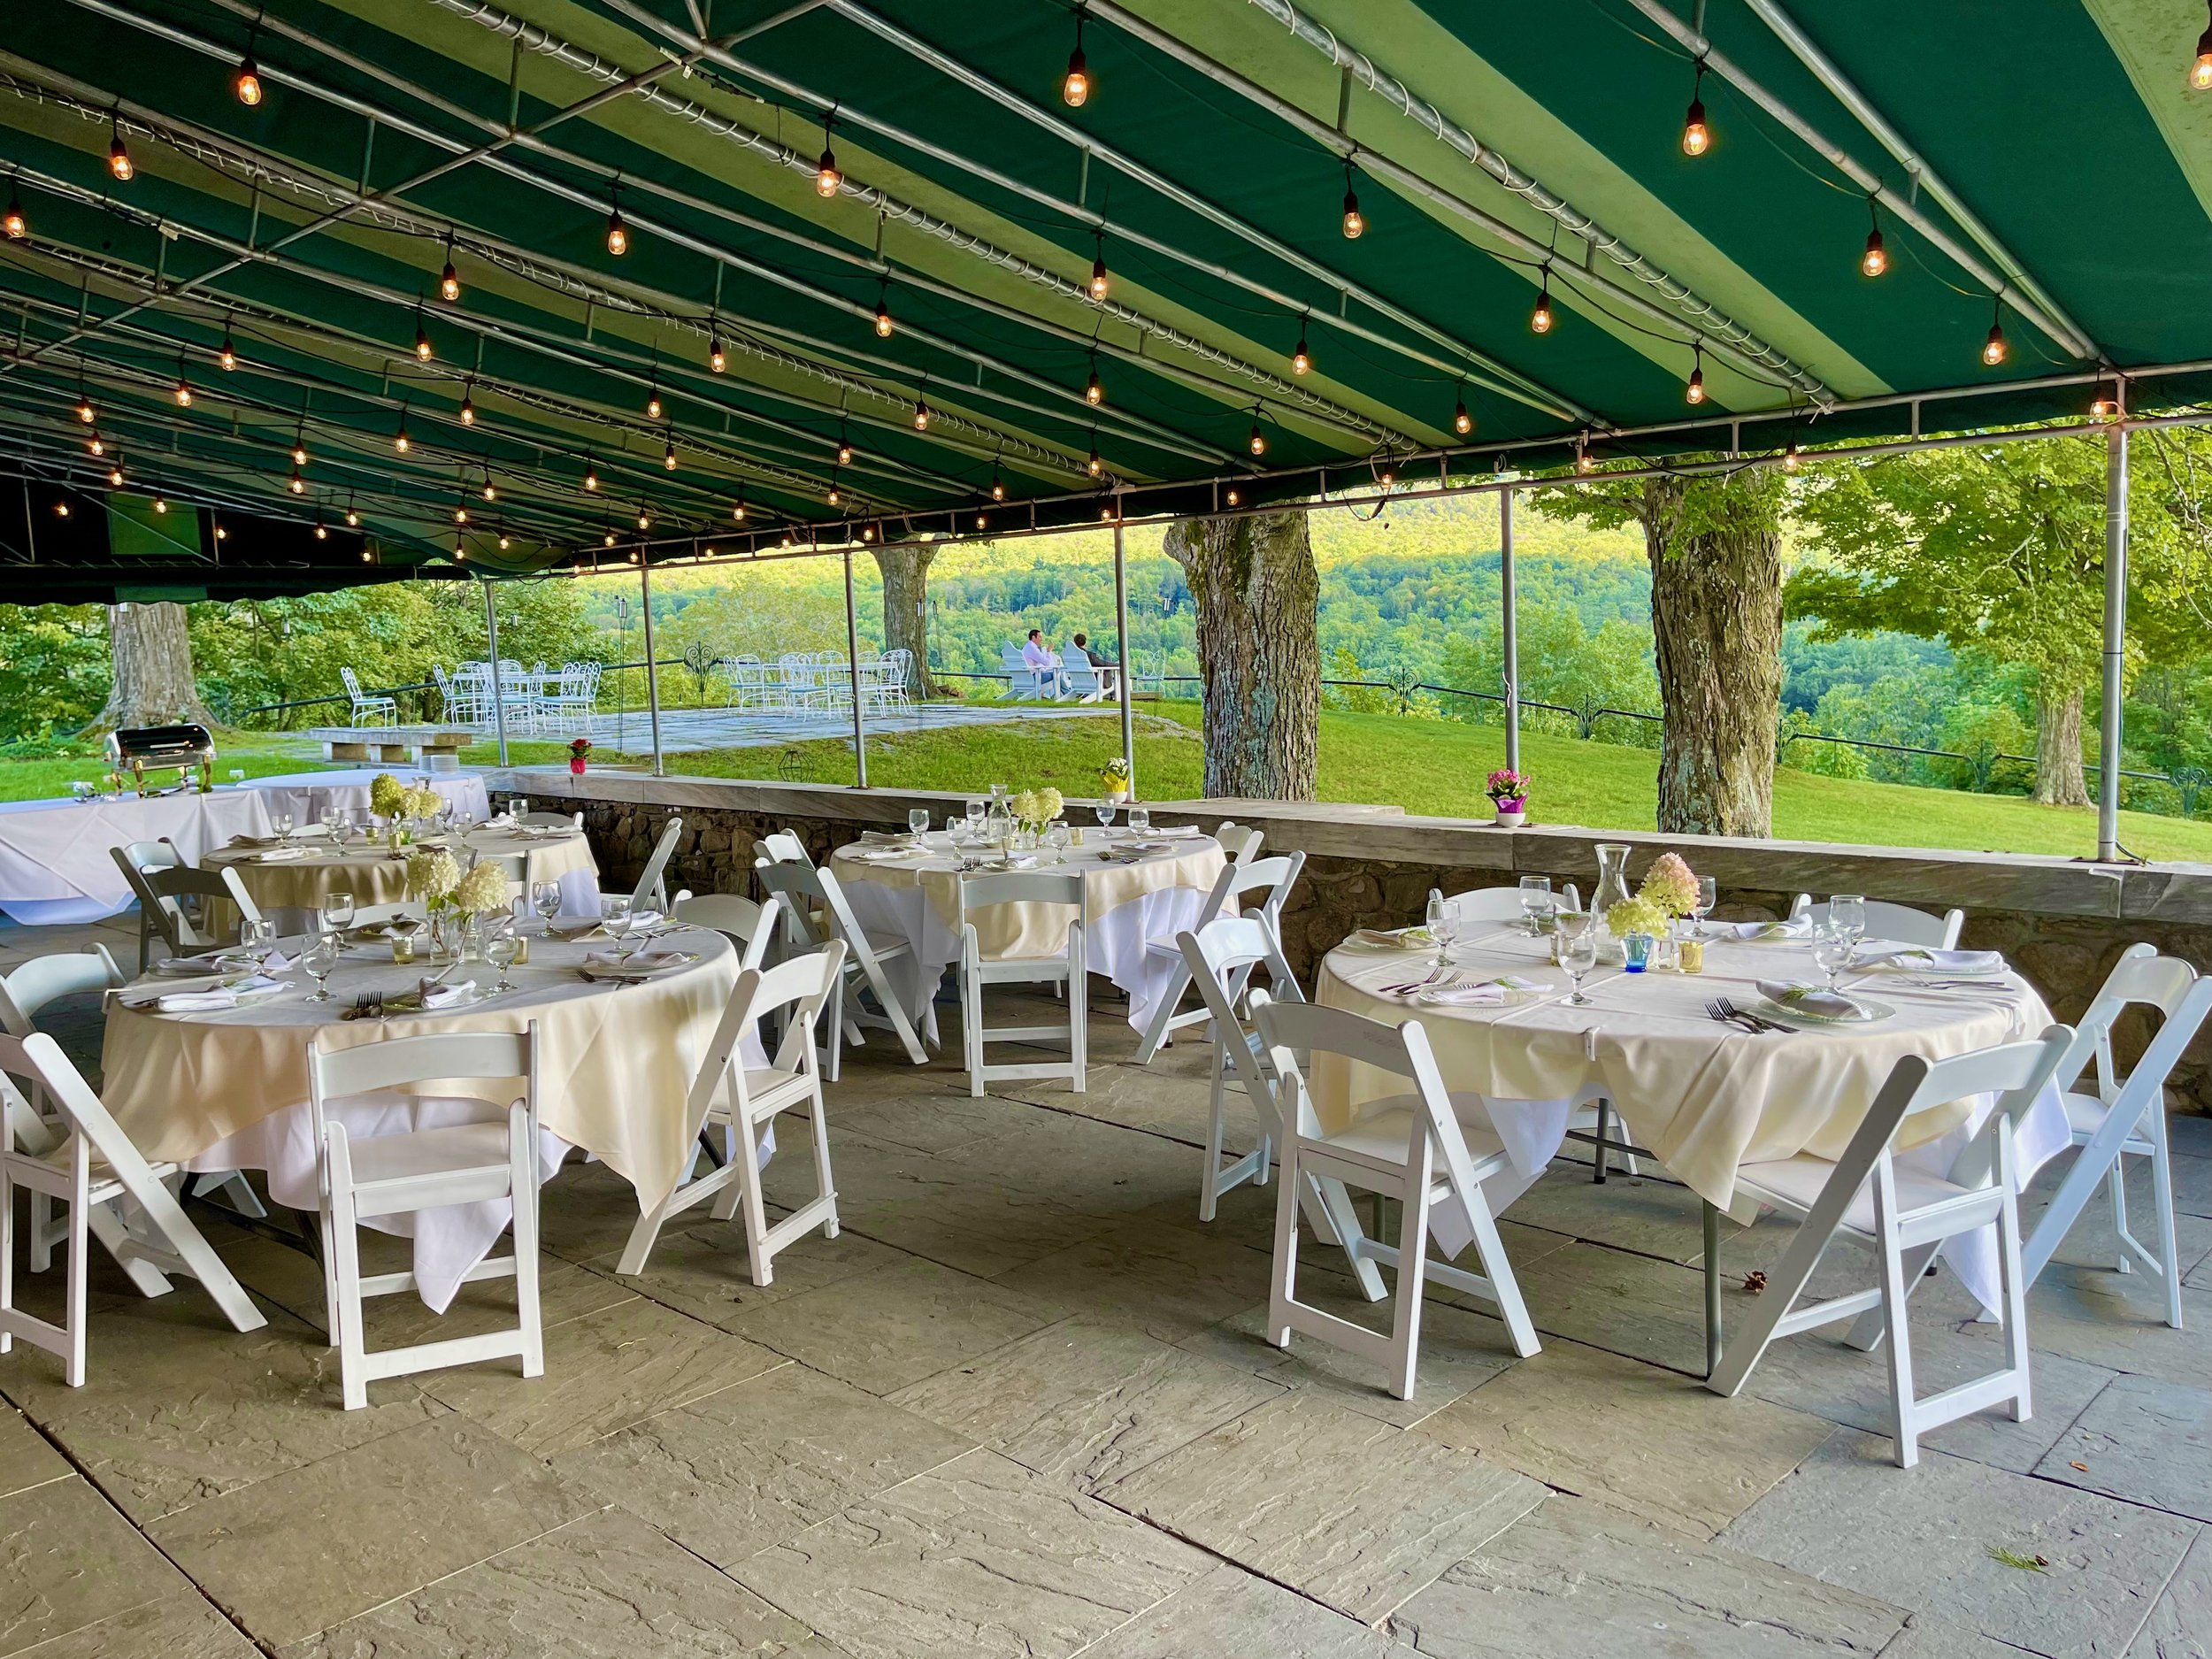 dine under the green awning at The Wilburton.jpeg